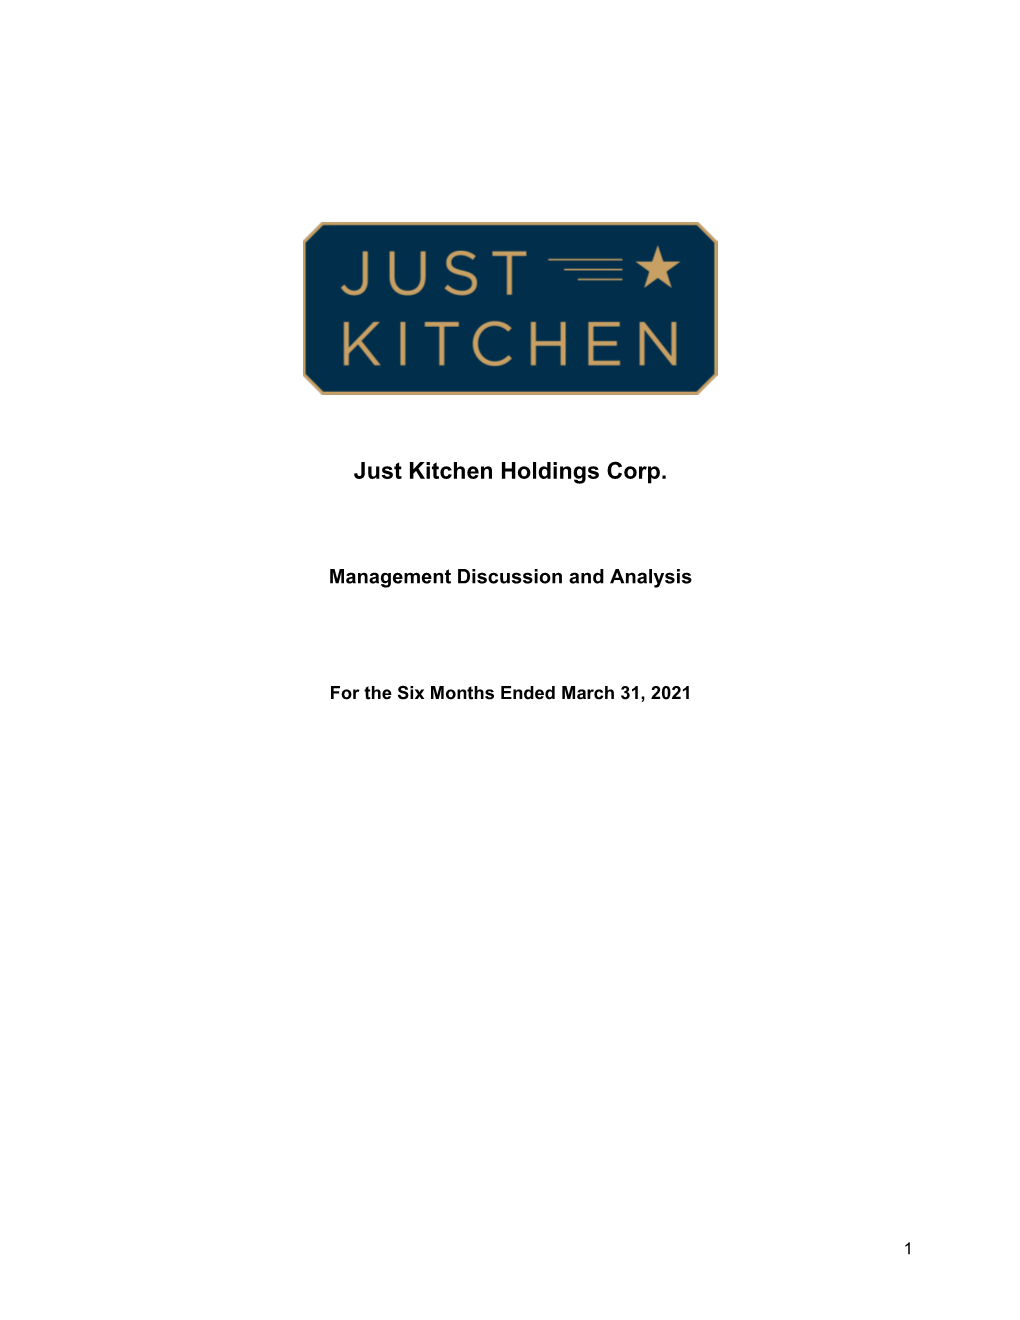 Just Kitchen Holdings Corp